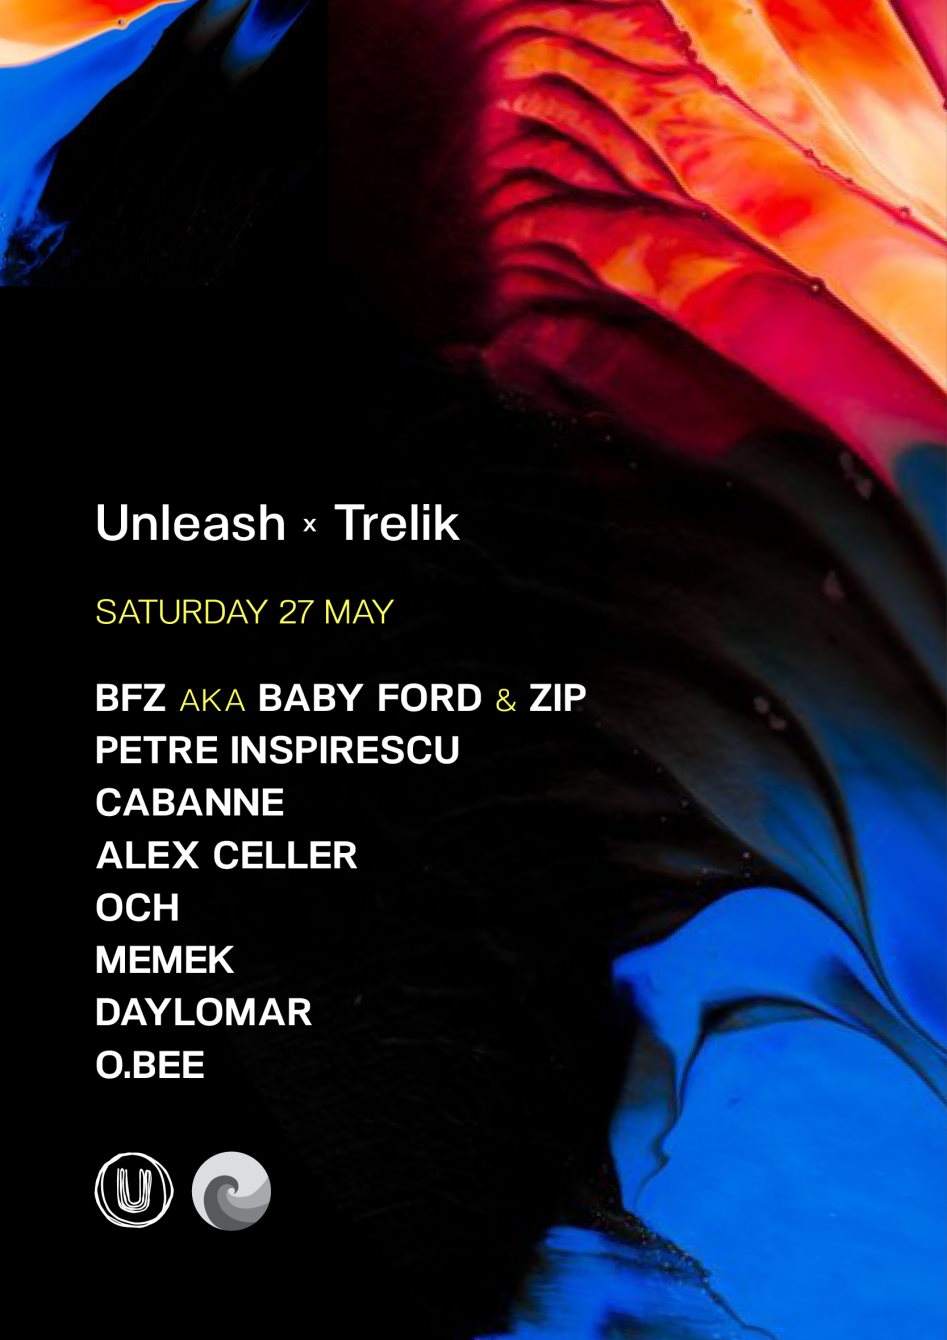 Unleash x Trelik with BFZ (Baby Ford & Zip), Pedro, Cabanne - フライヤー表